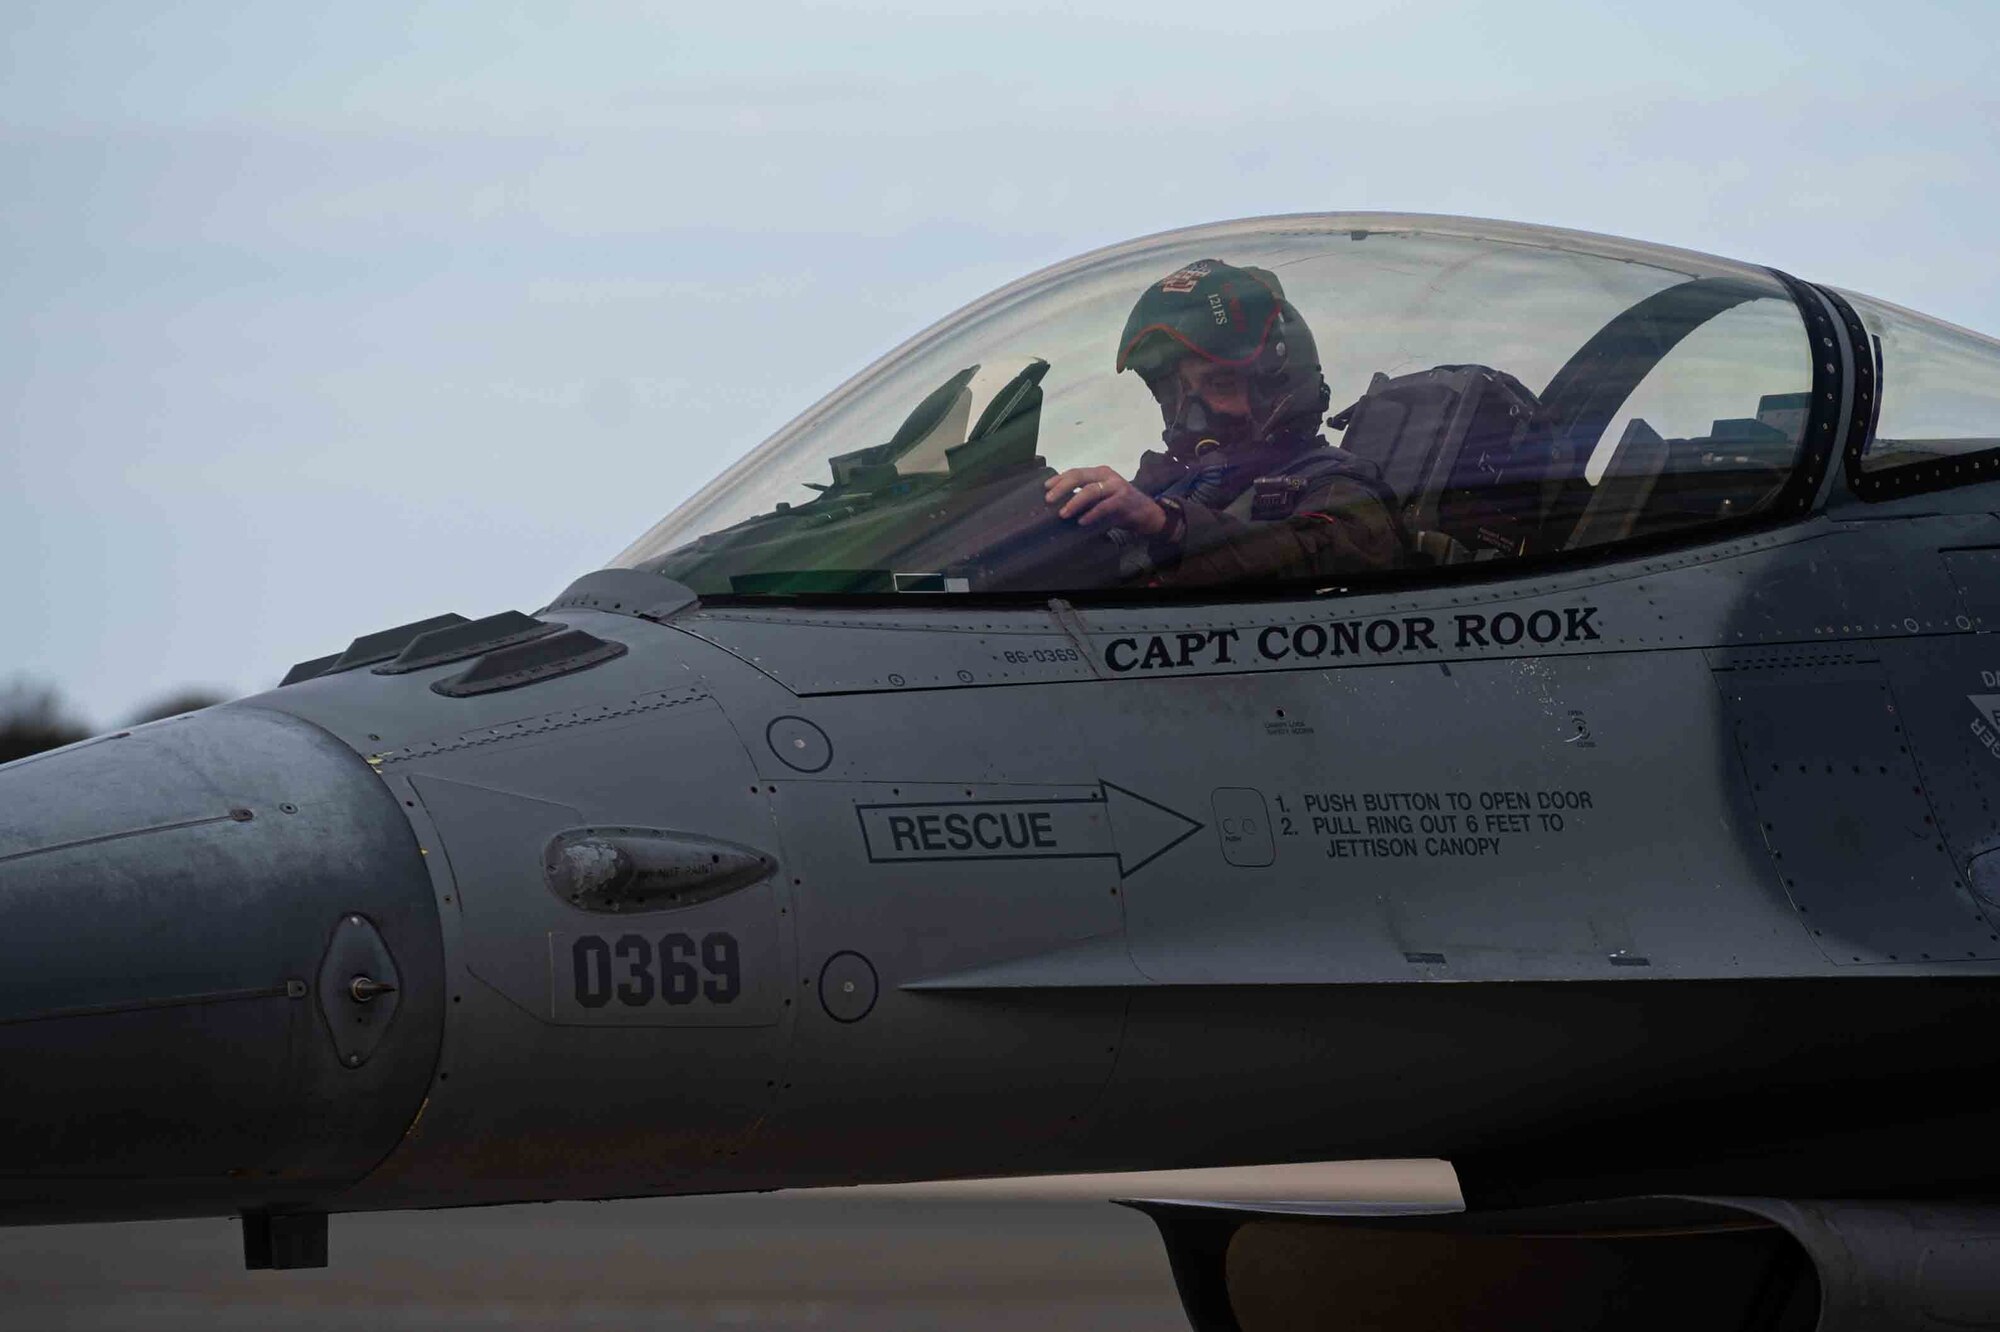 1st Lt. Jason Grubb, 121st Fighter Squadron pilot, does a pre-flight check on an F-15 Fighting Falcon assigned to the 121st Fighter Squadron at Joint Base Andrews, Maryland, while at Dover Air Force Base, Delaware, Nov. 25, 2020. The aircraft stopped at Dover Air Force Base during a training mission. The base prioritizes providing unrivaled installation support for mission partners, transit aircraft and neighboring installations.  (U.S. Air Force photo by Airman 1st Class Faith Schaefer)